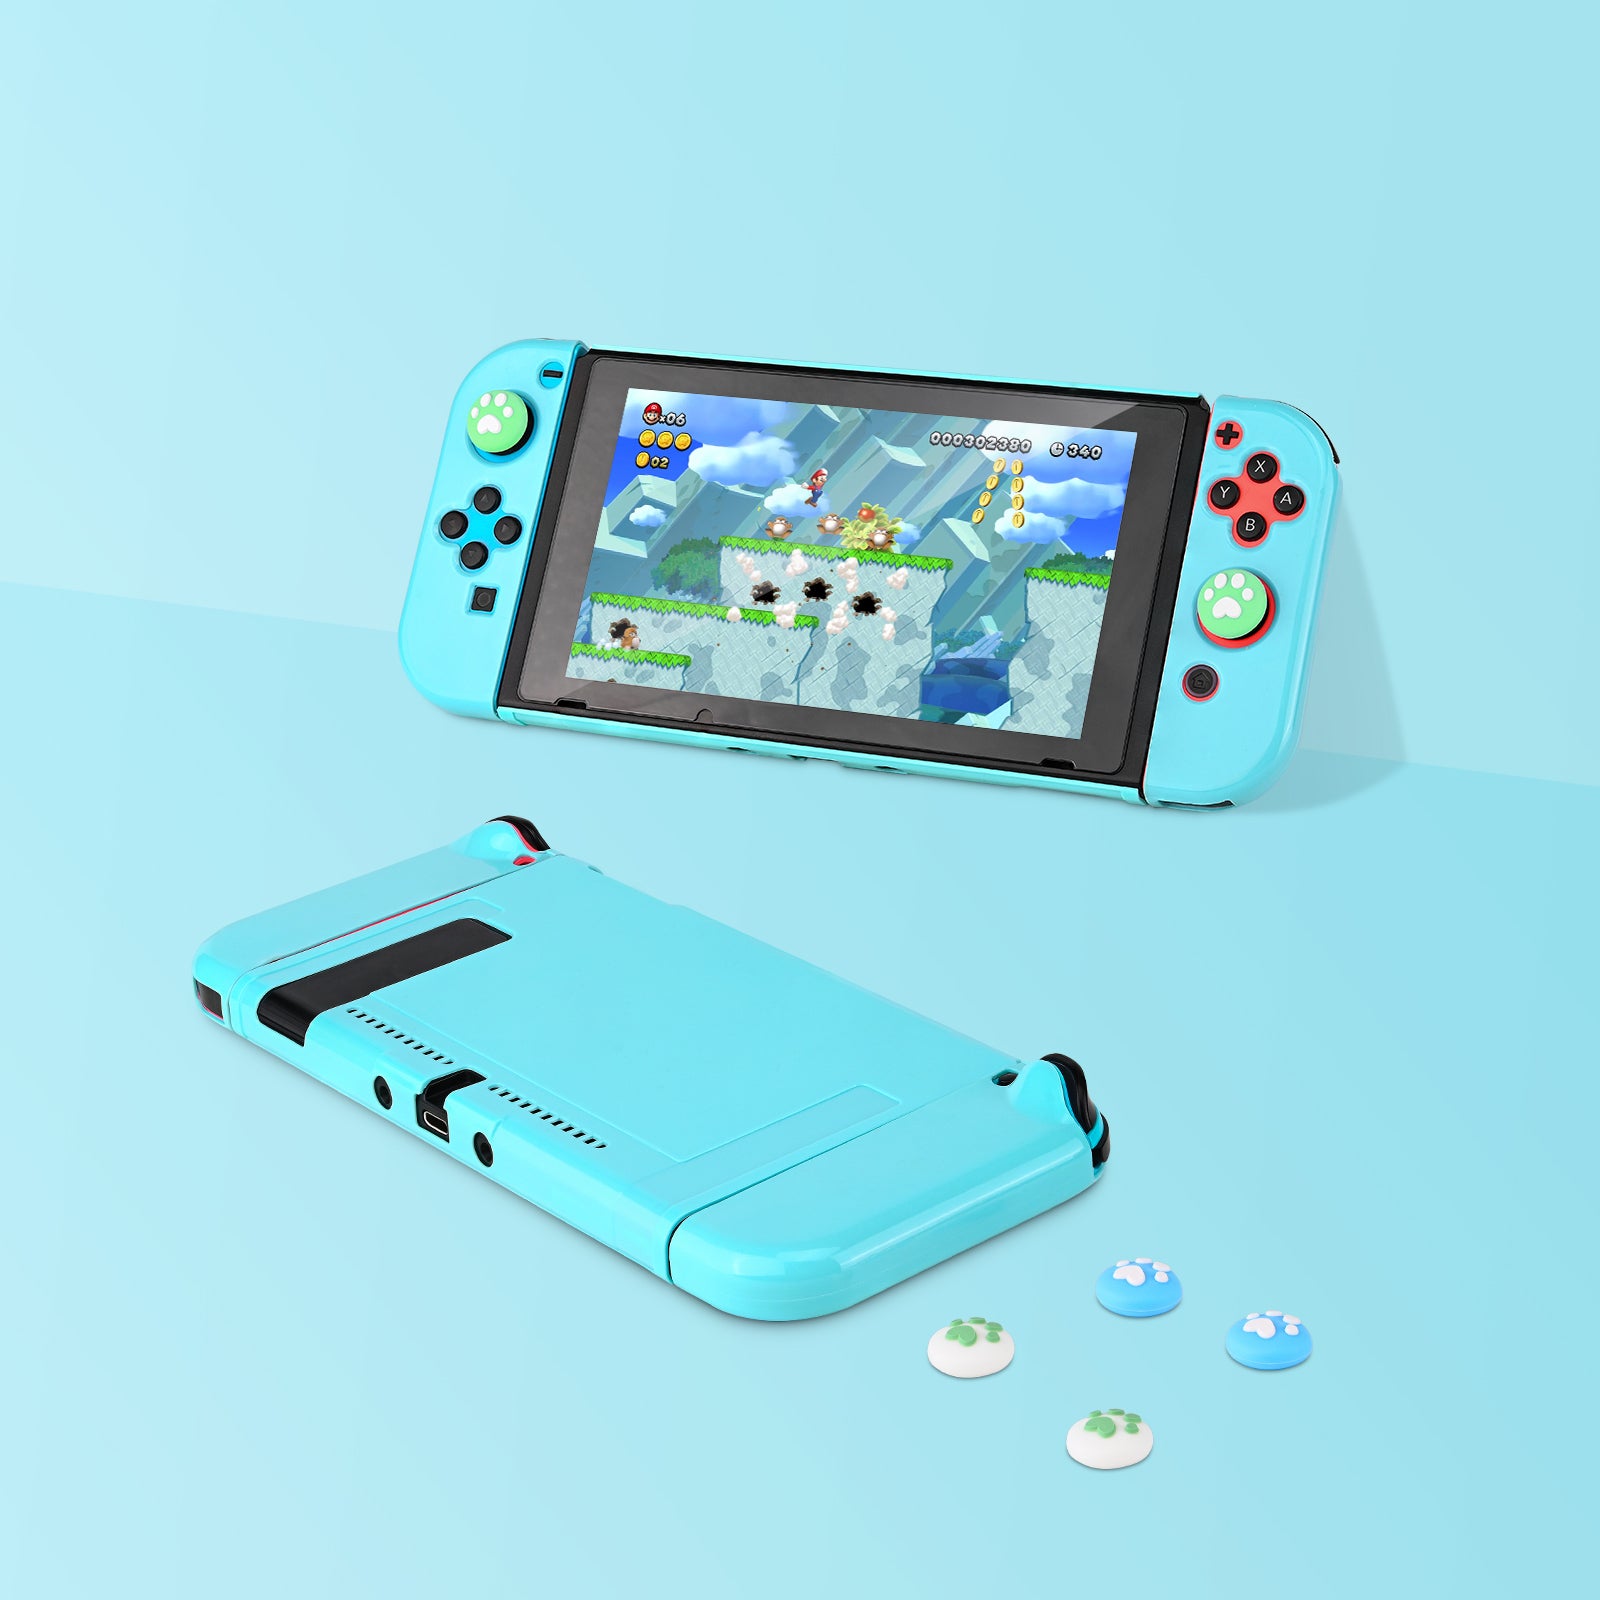 Younik Switch Carrying Case with 15 Accessories, Case for Switch